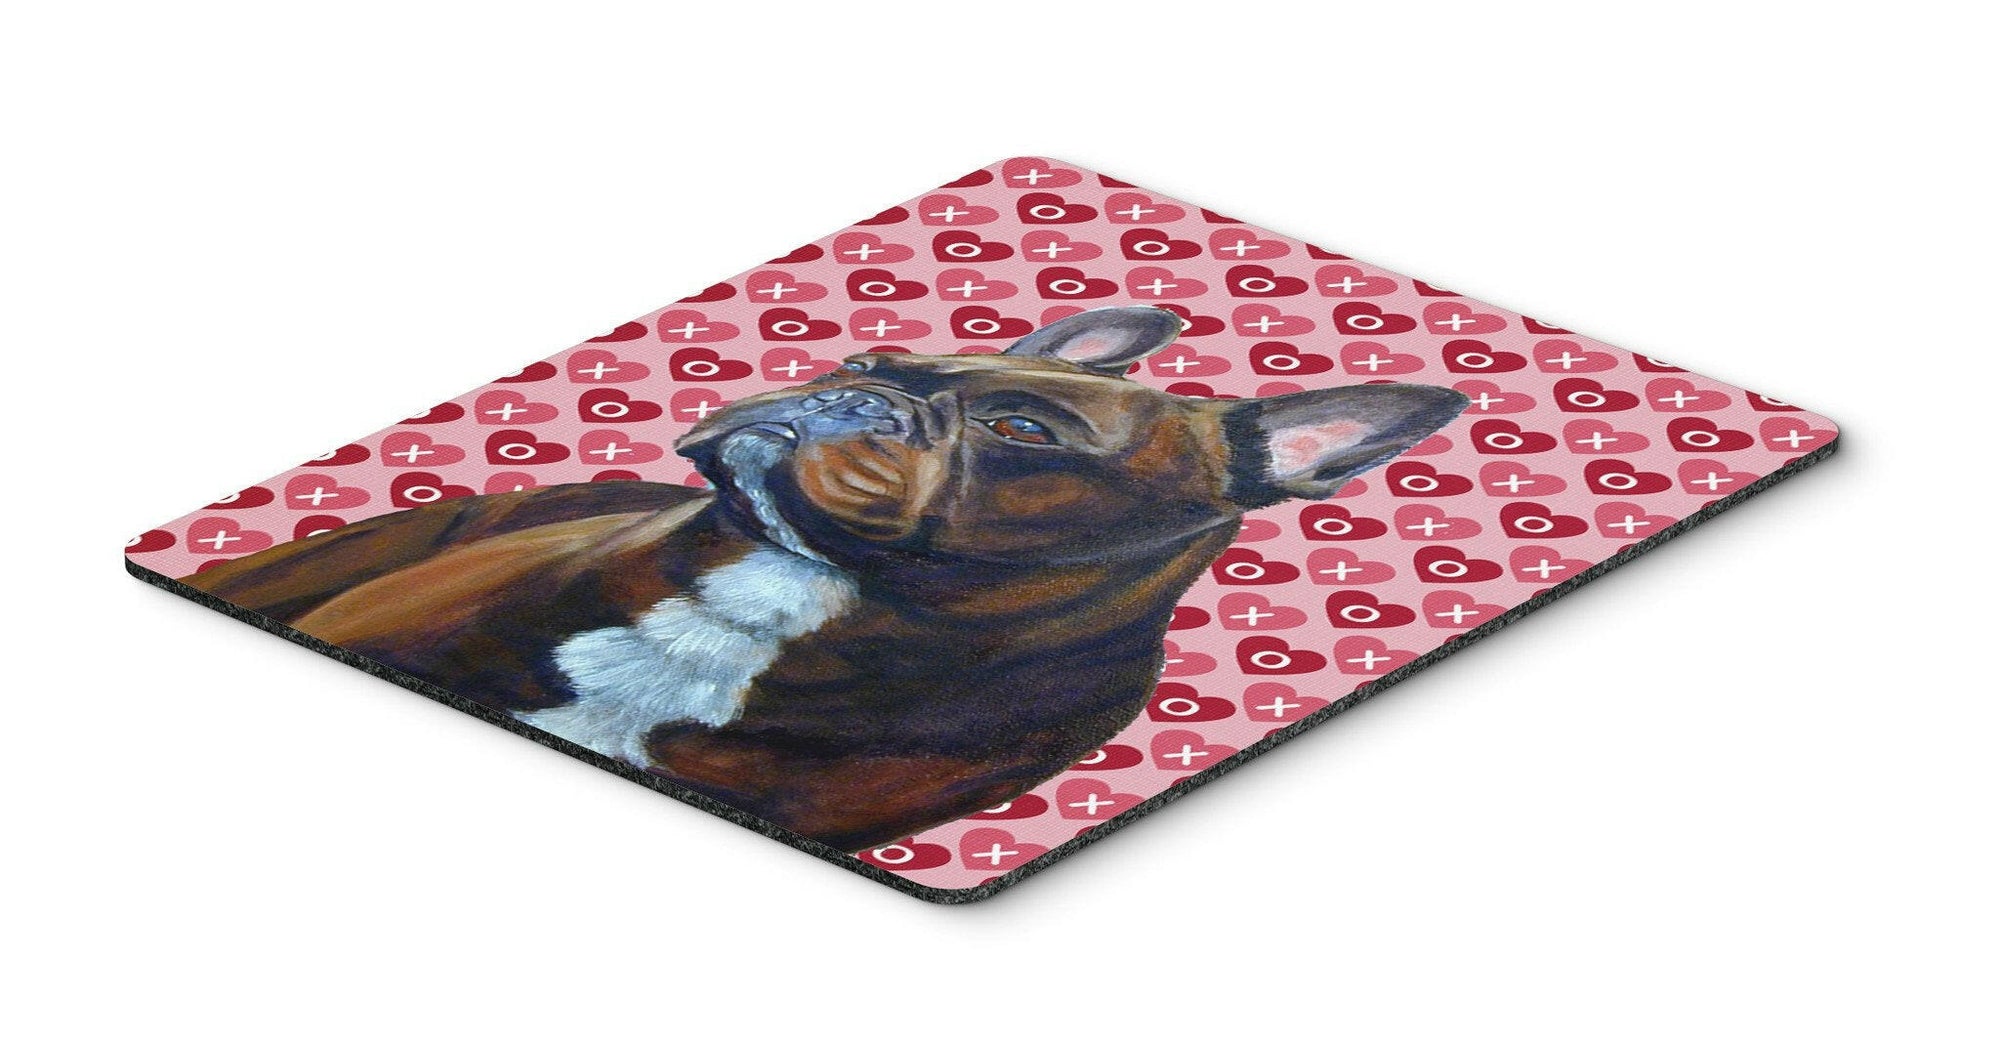 French Bulldog Hearts Love and Valentine's Day Mouse Pad, Hot Pad or Trivet by Caroline's Treasures